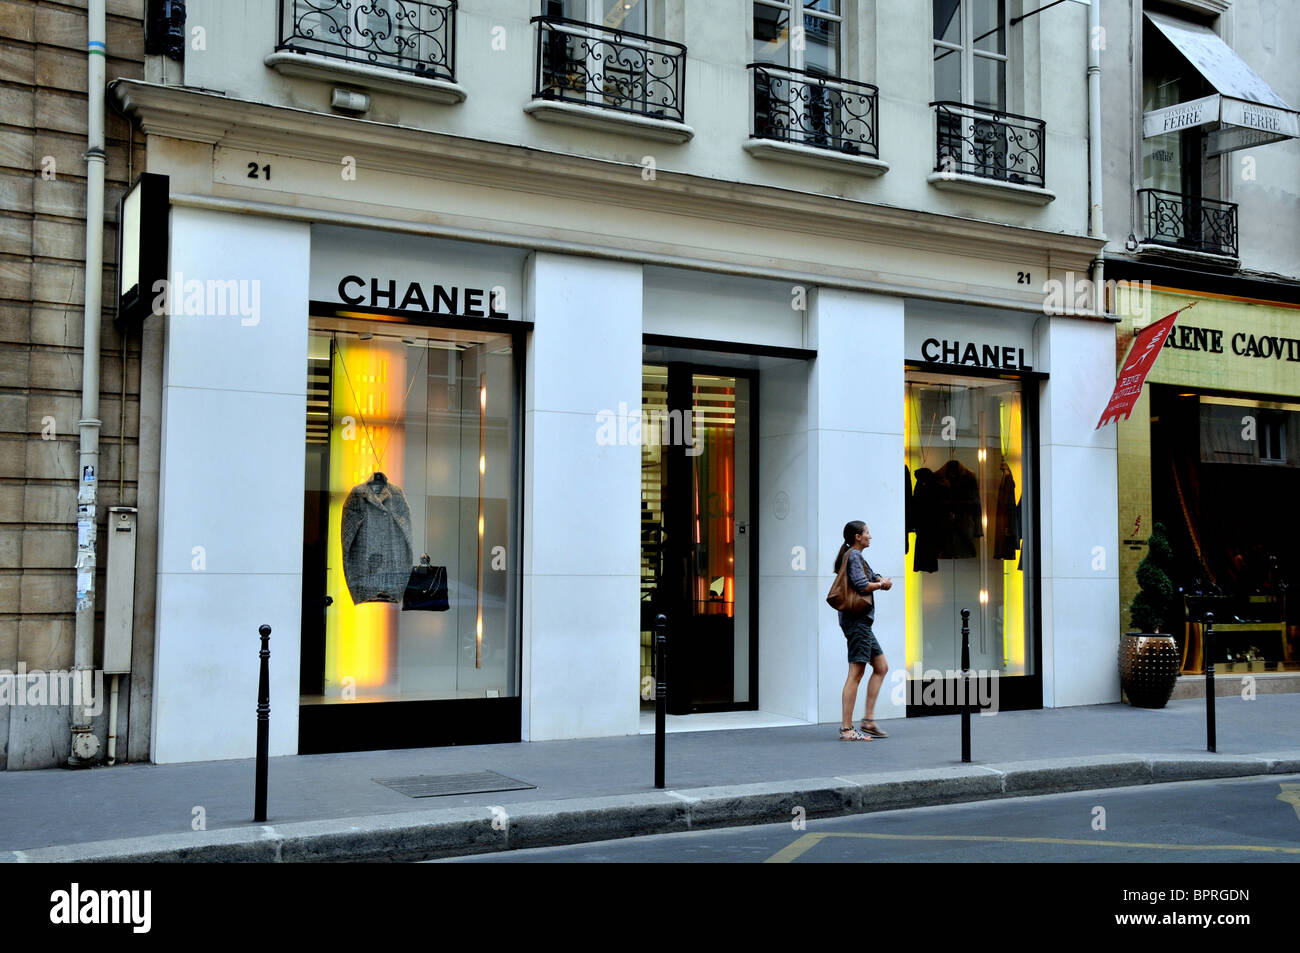 Chanel Stores In Paris France | IUCN Water